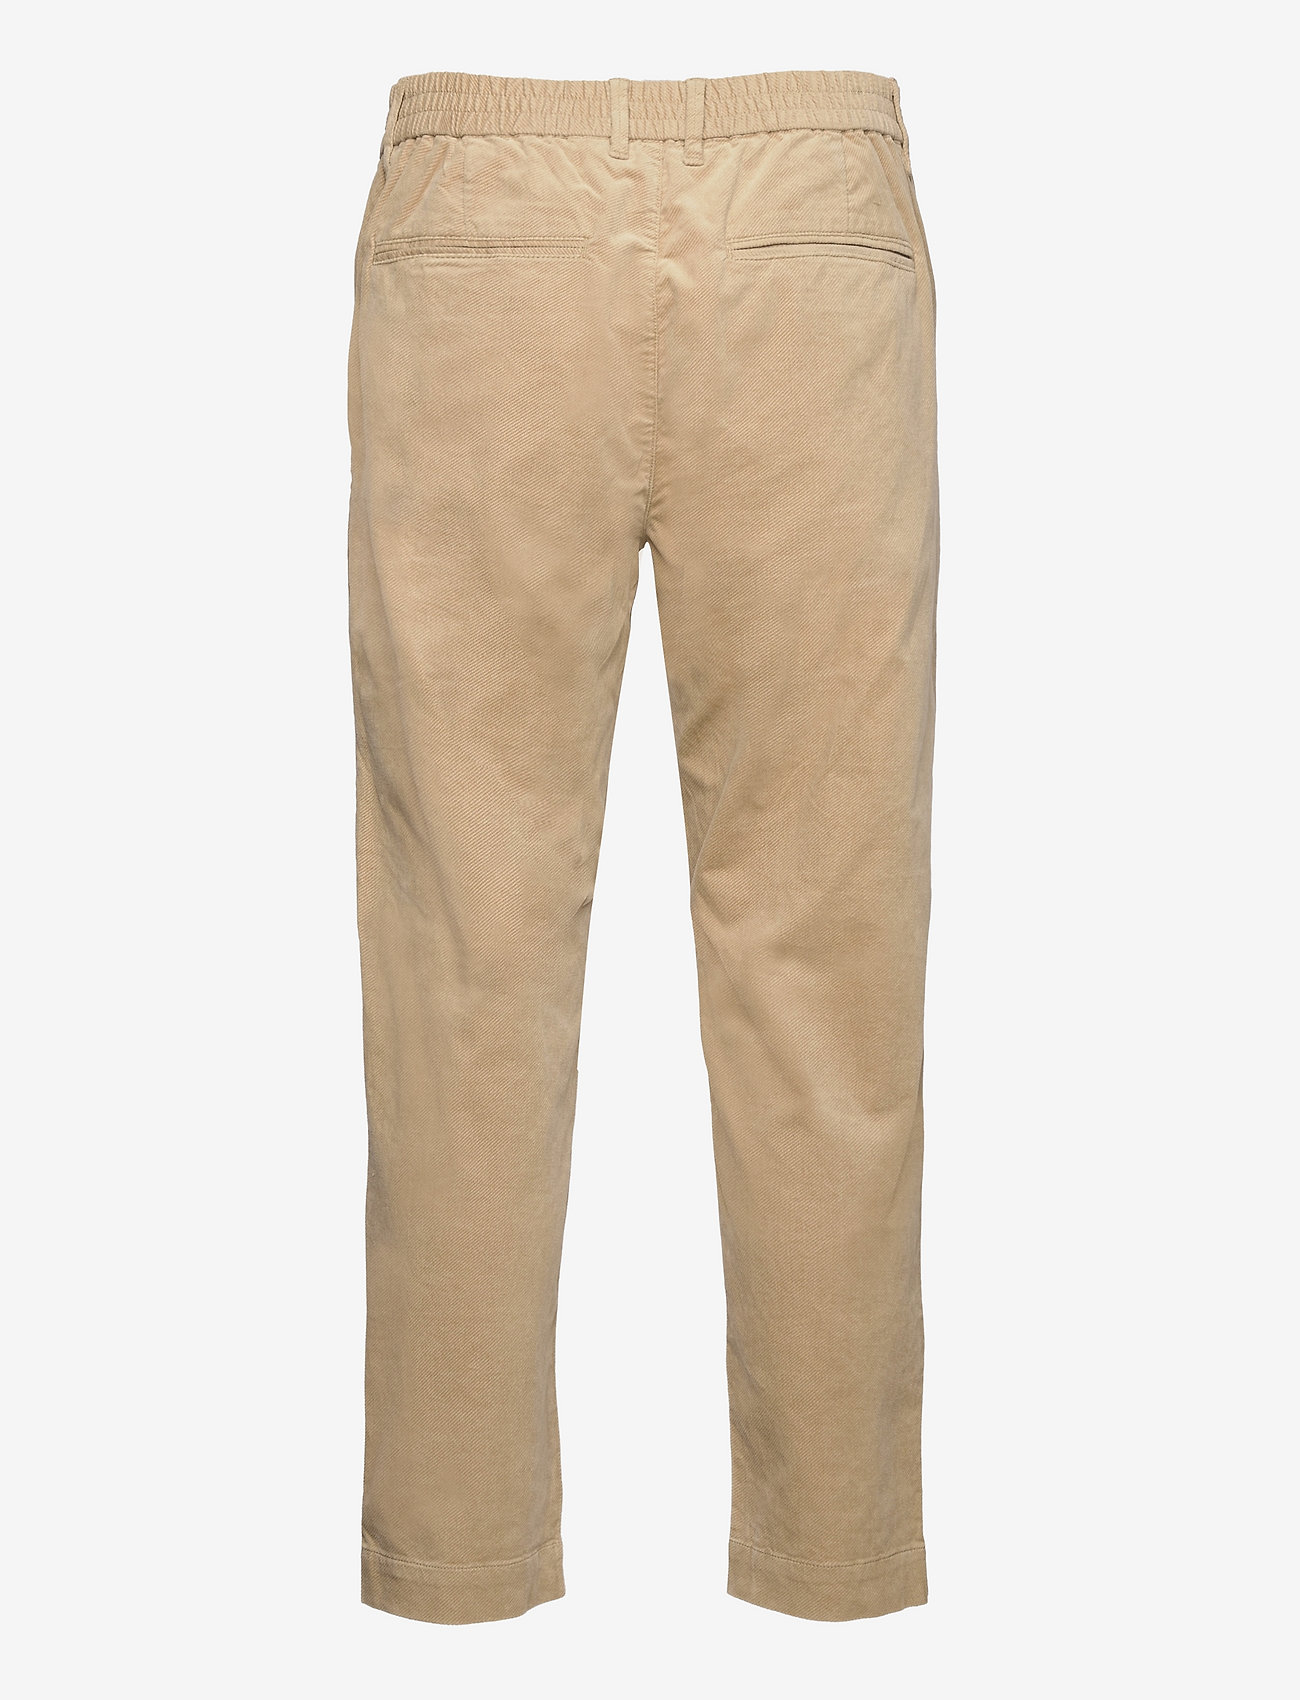 Esprit Collection - Men Pants woven cropped - chinosy - beige - 1